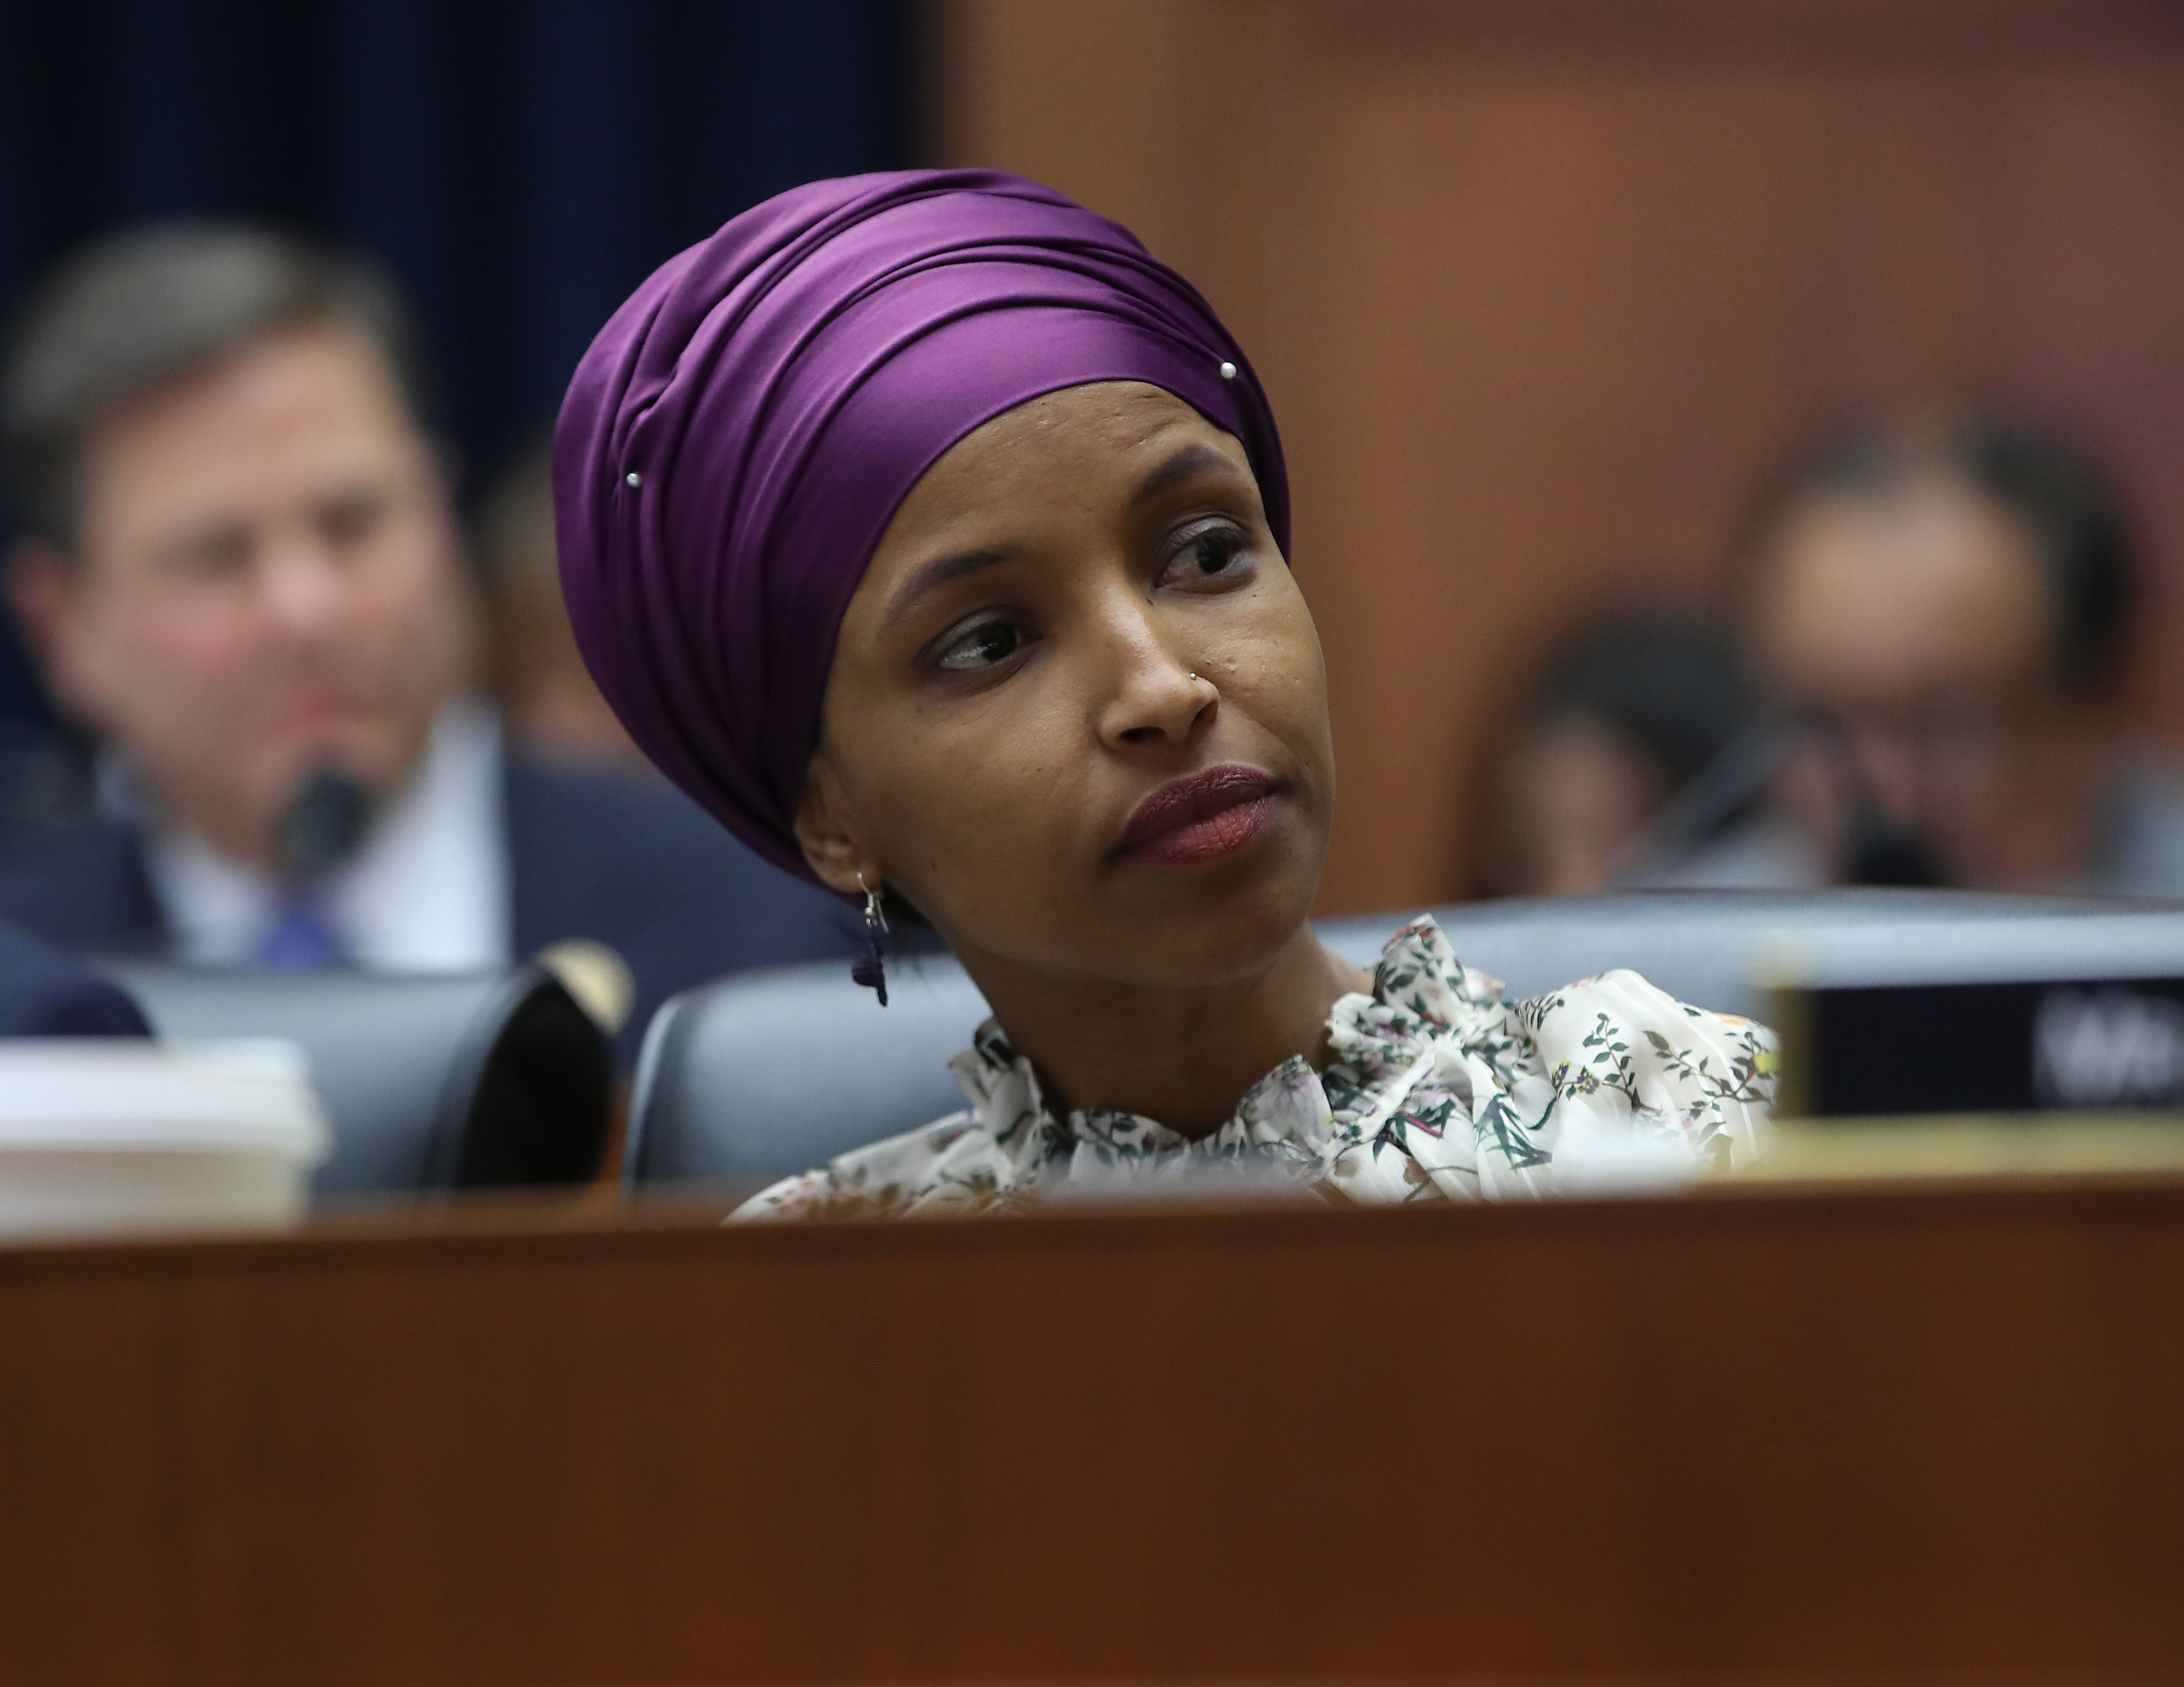 Did Ilhan Omar Marry Her Brother?